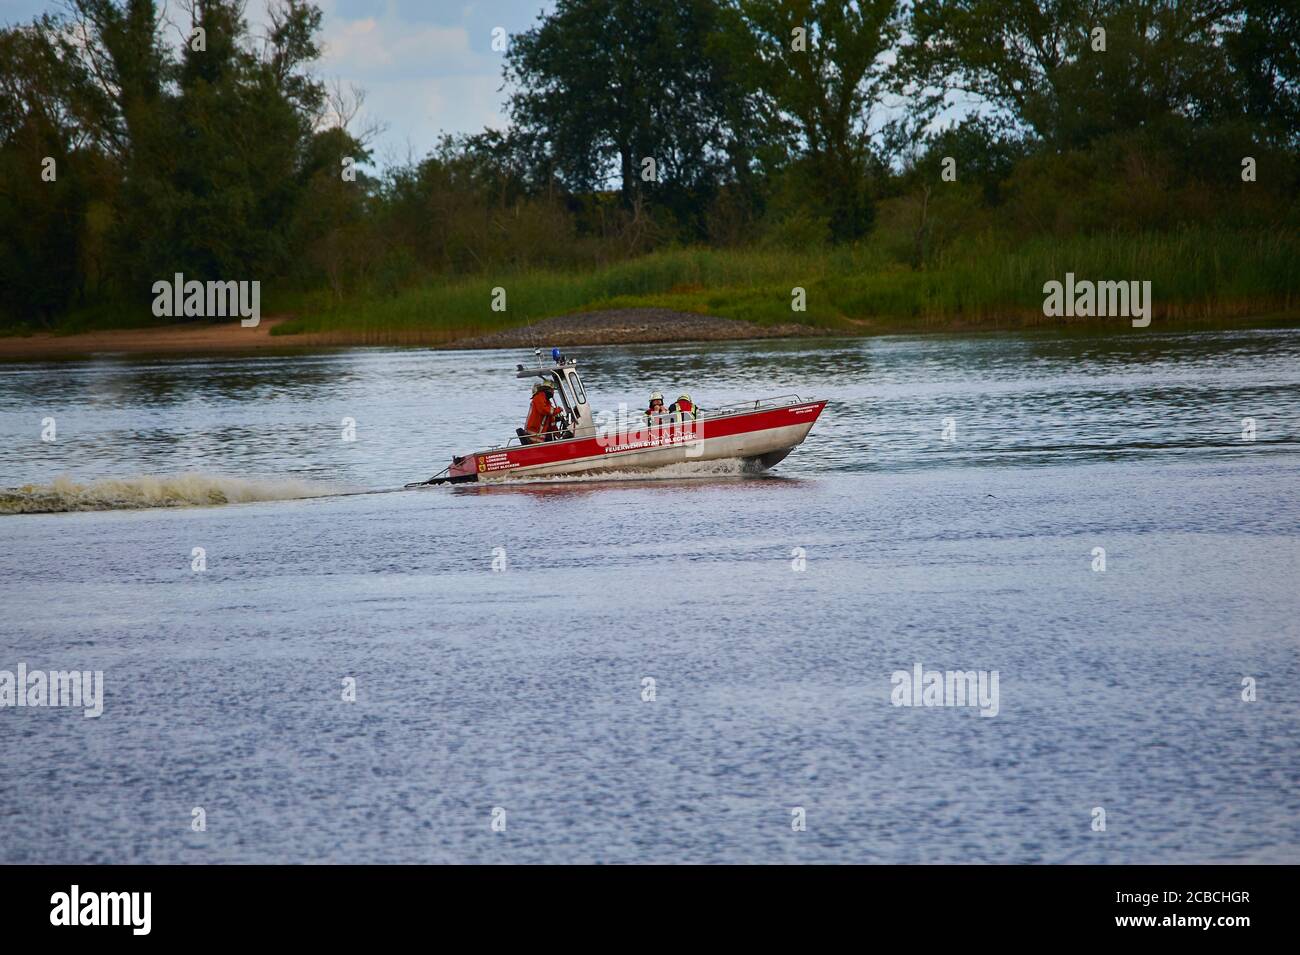 A fire-brigade boat dashing off for a an emergency rescue mission on river Elbe Stock Photo